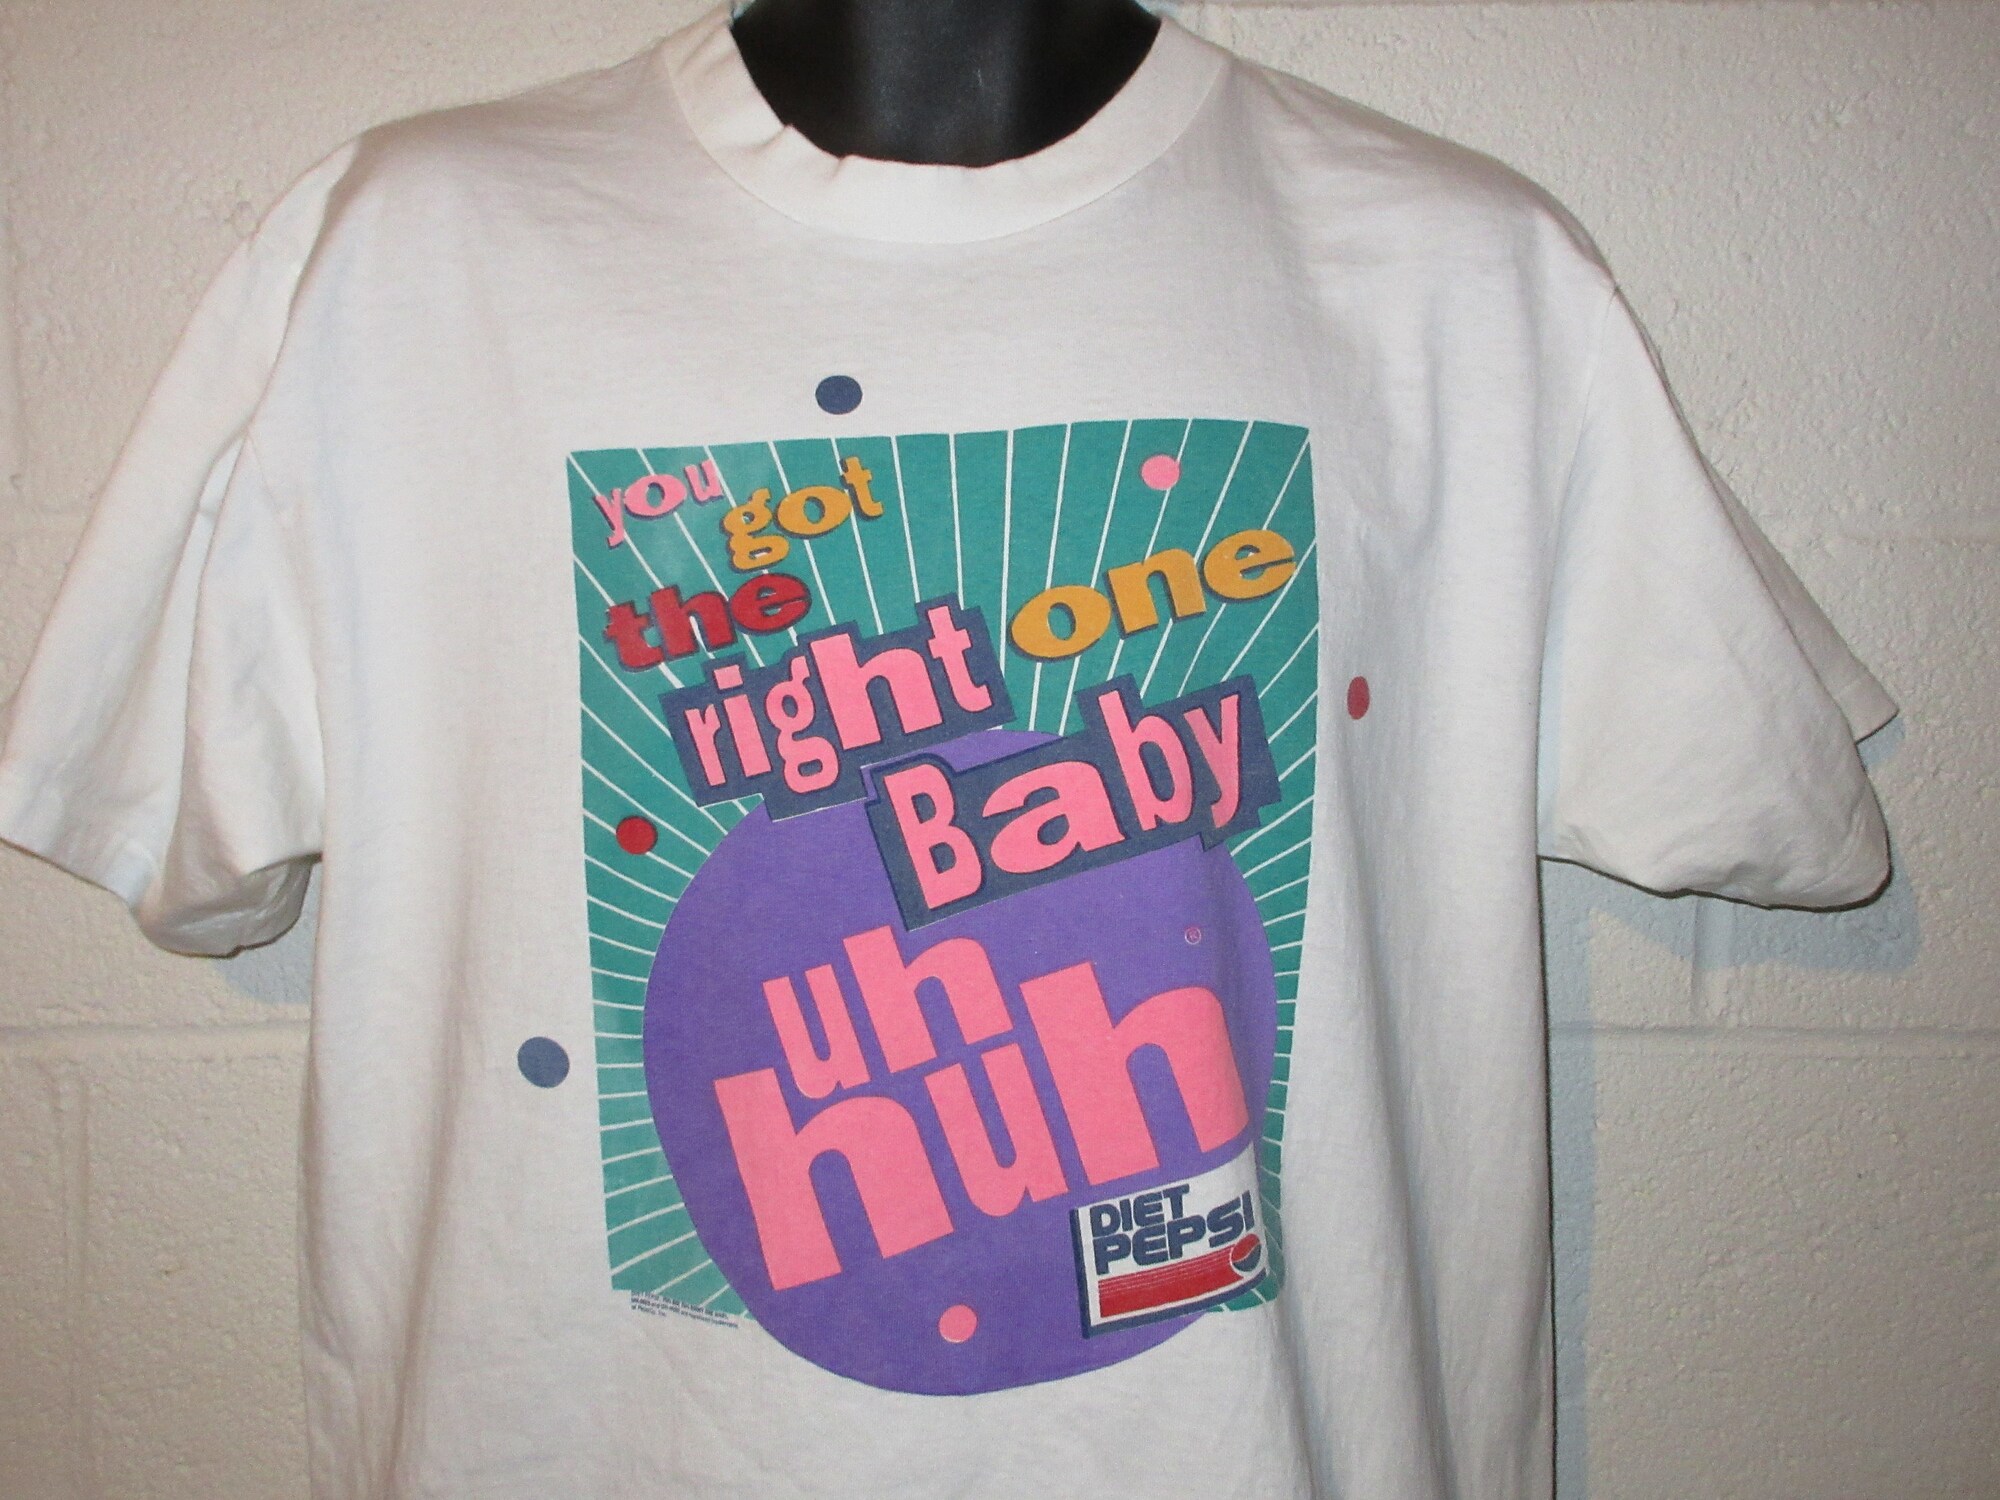 Discover Vintage 90s Ray Charles You Got the Right One Baby Uh Huh Diet Pepsi T-Shirt